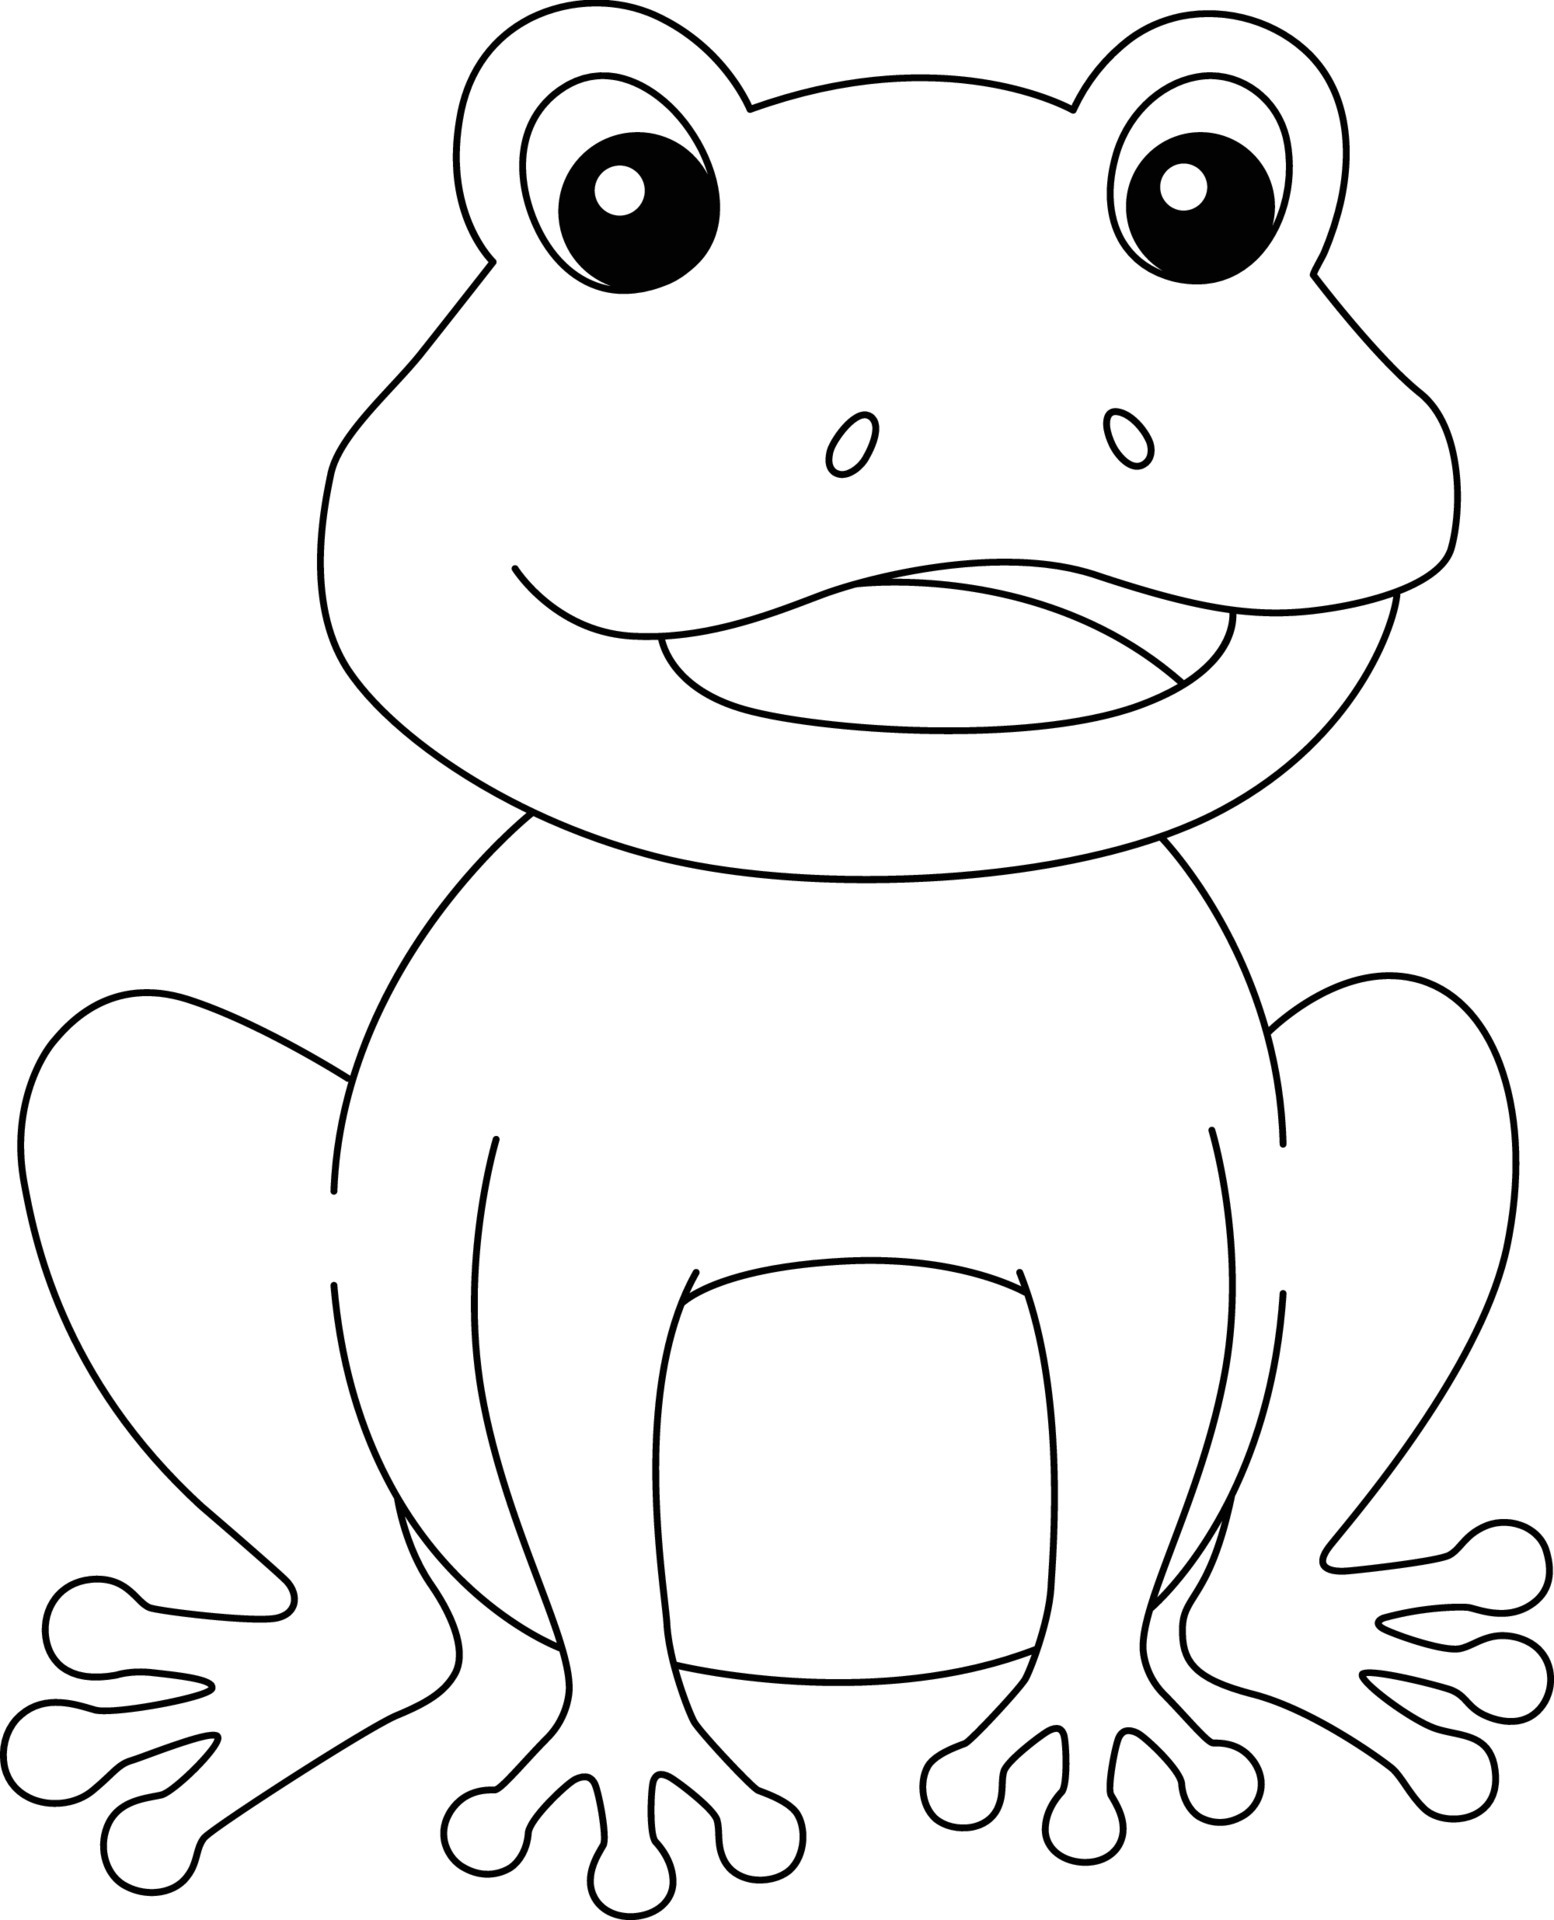 Frog Coloring Page Isolated for Kids 20 Vector Art at Vecteezy